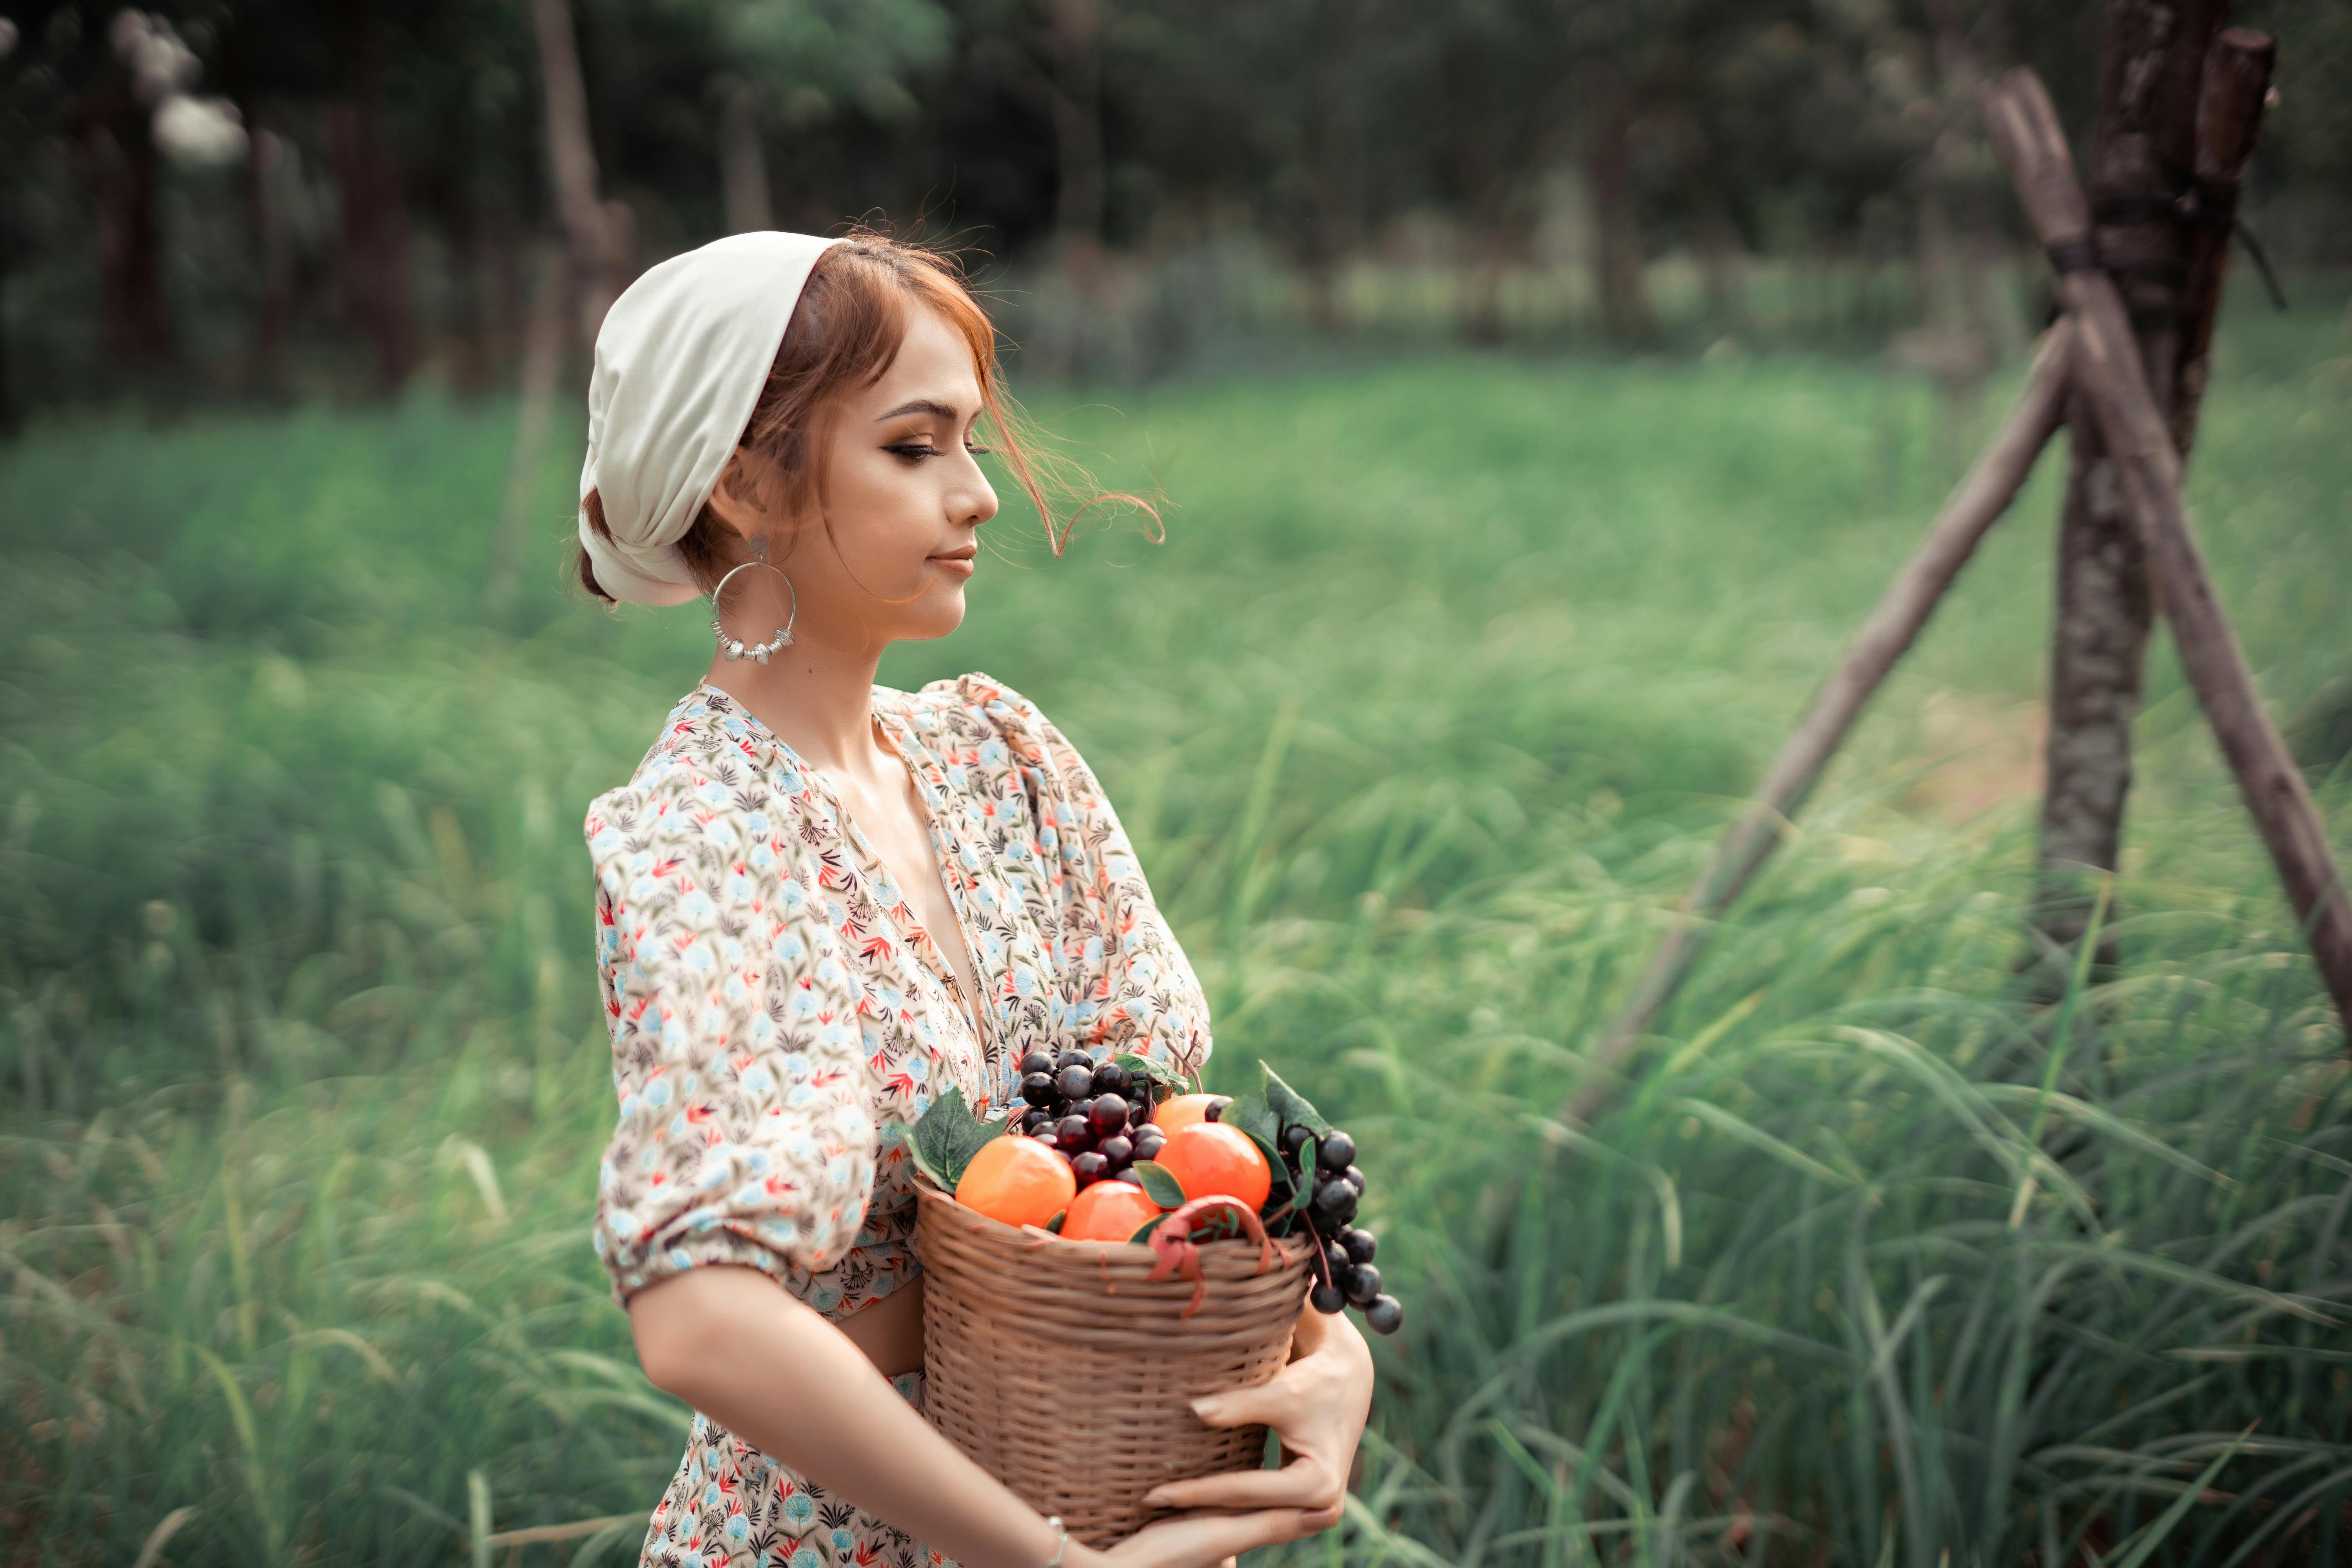 Young woman holding basket with fruits  More info  Share More like this